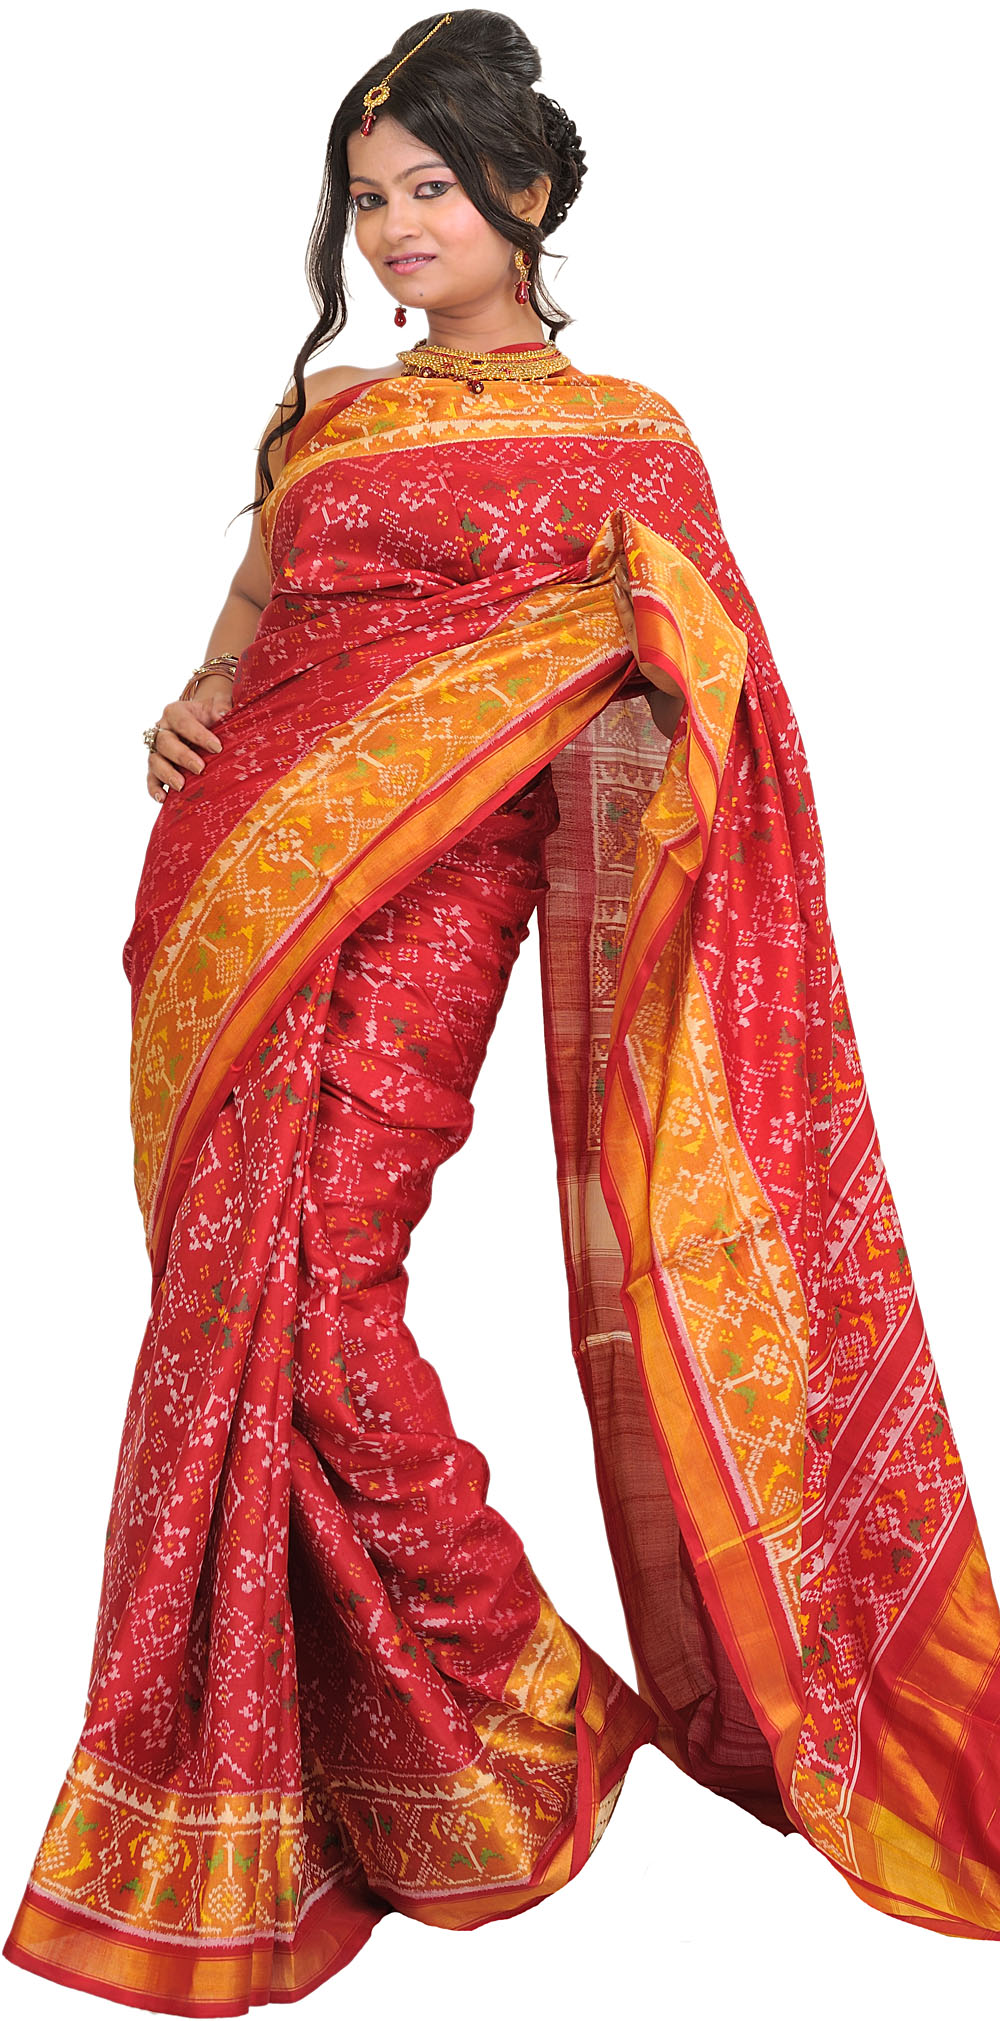 Pompeian-Red Patan Patola Sari from Gujarat with Ikat Weave | Exotic ...